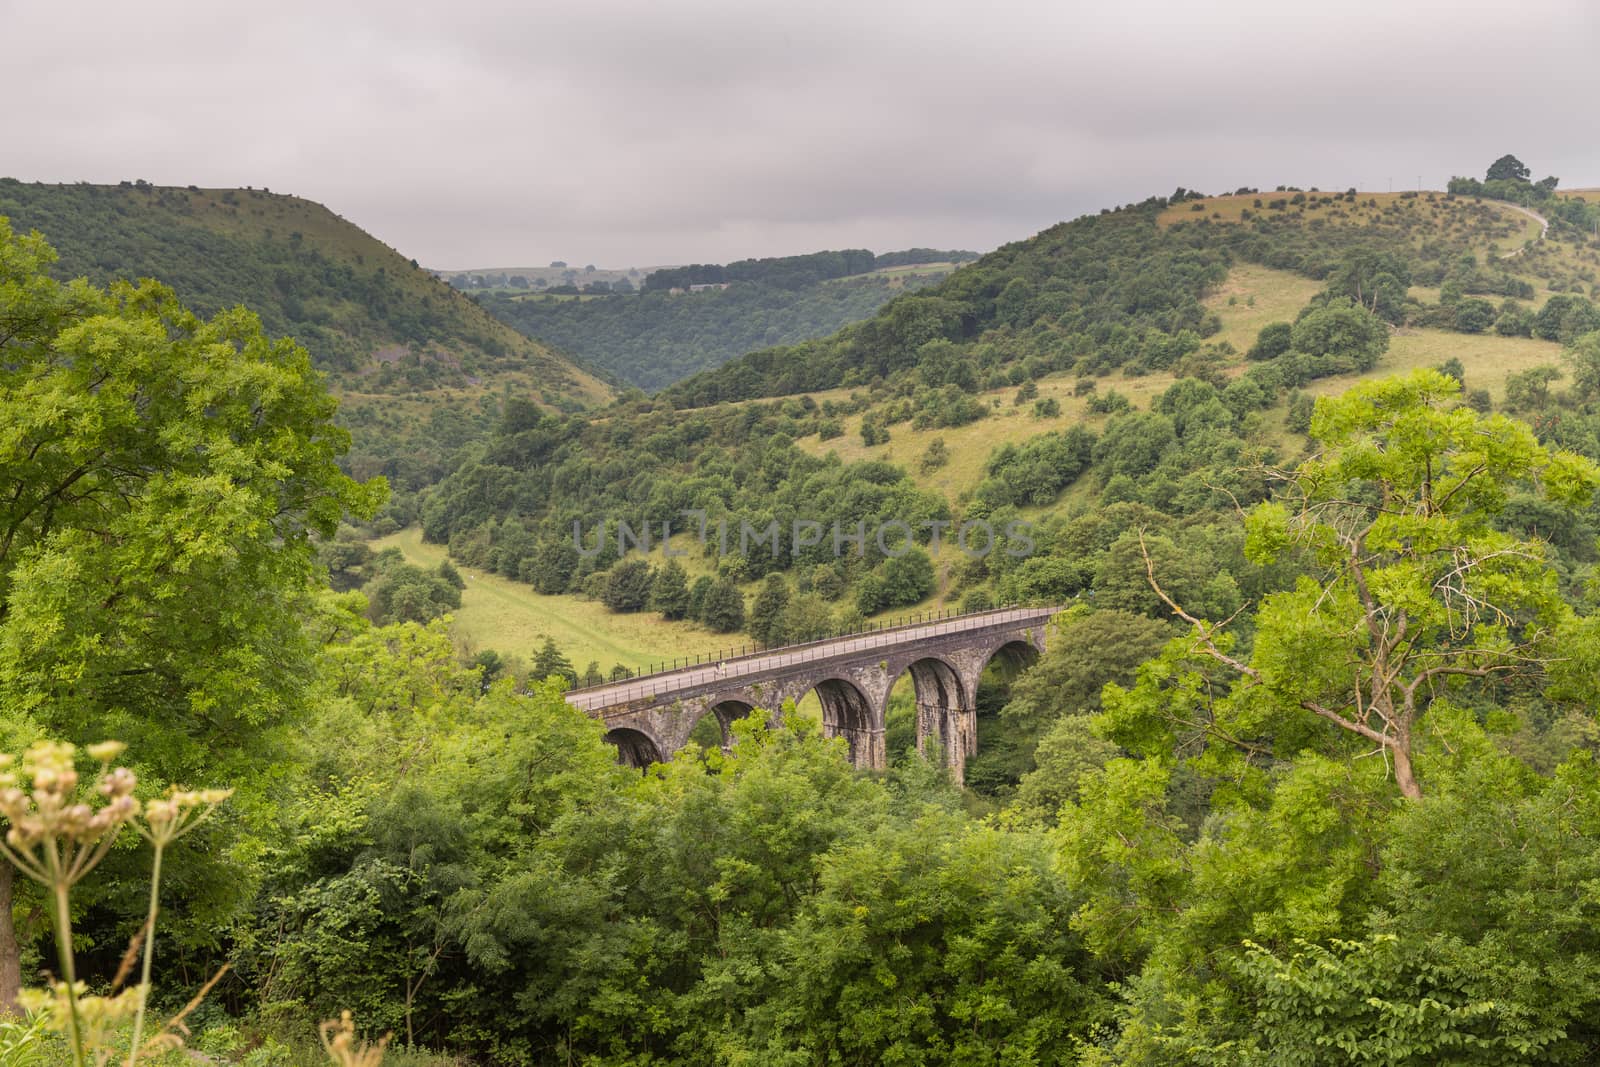 From Monsal Head, the Monsal Trail passes over Headstone Viaduct by chrisukphoto